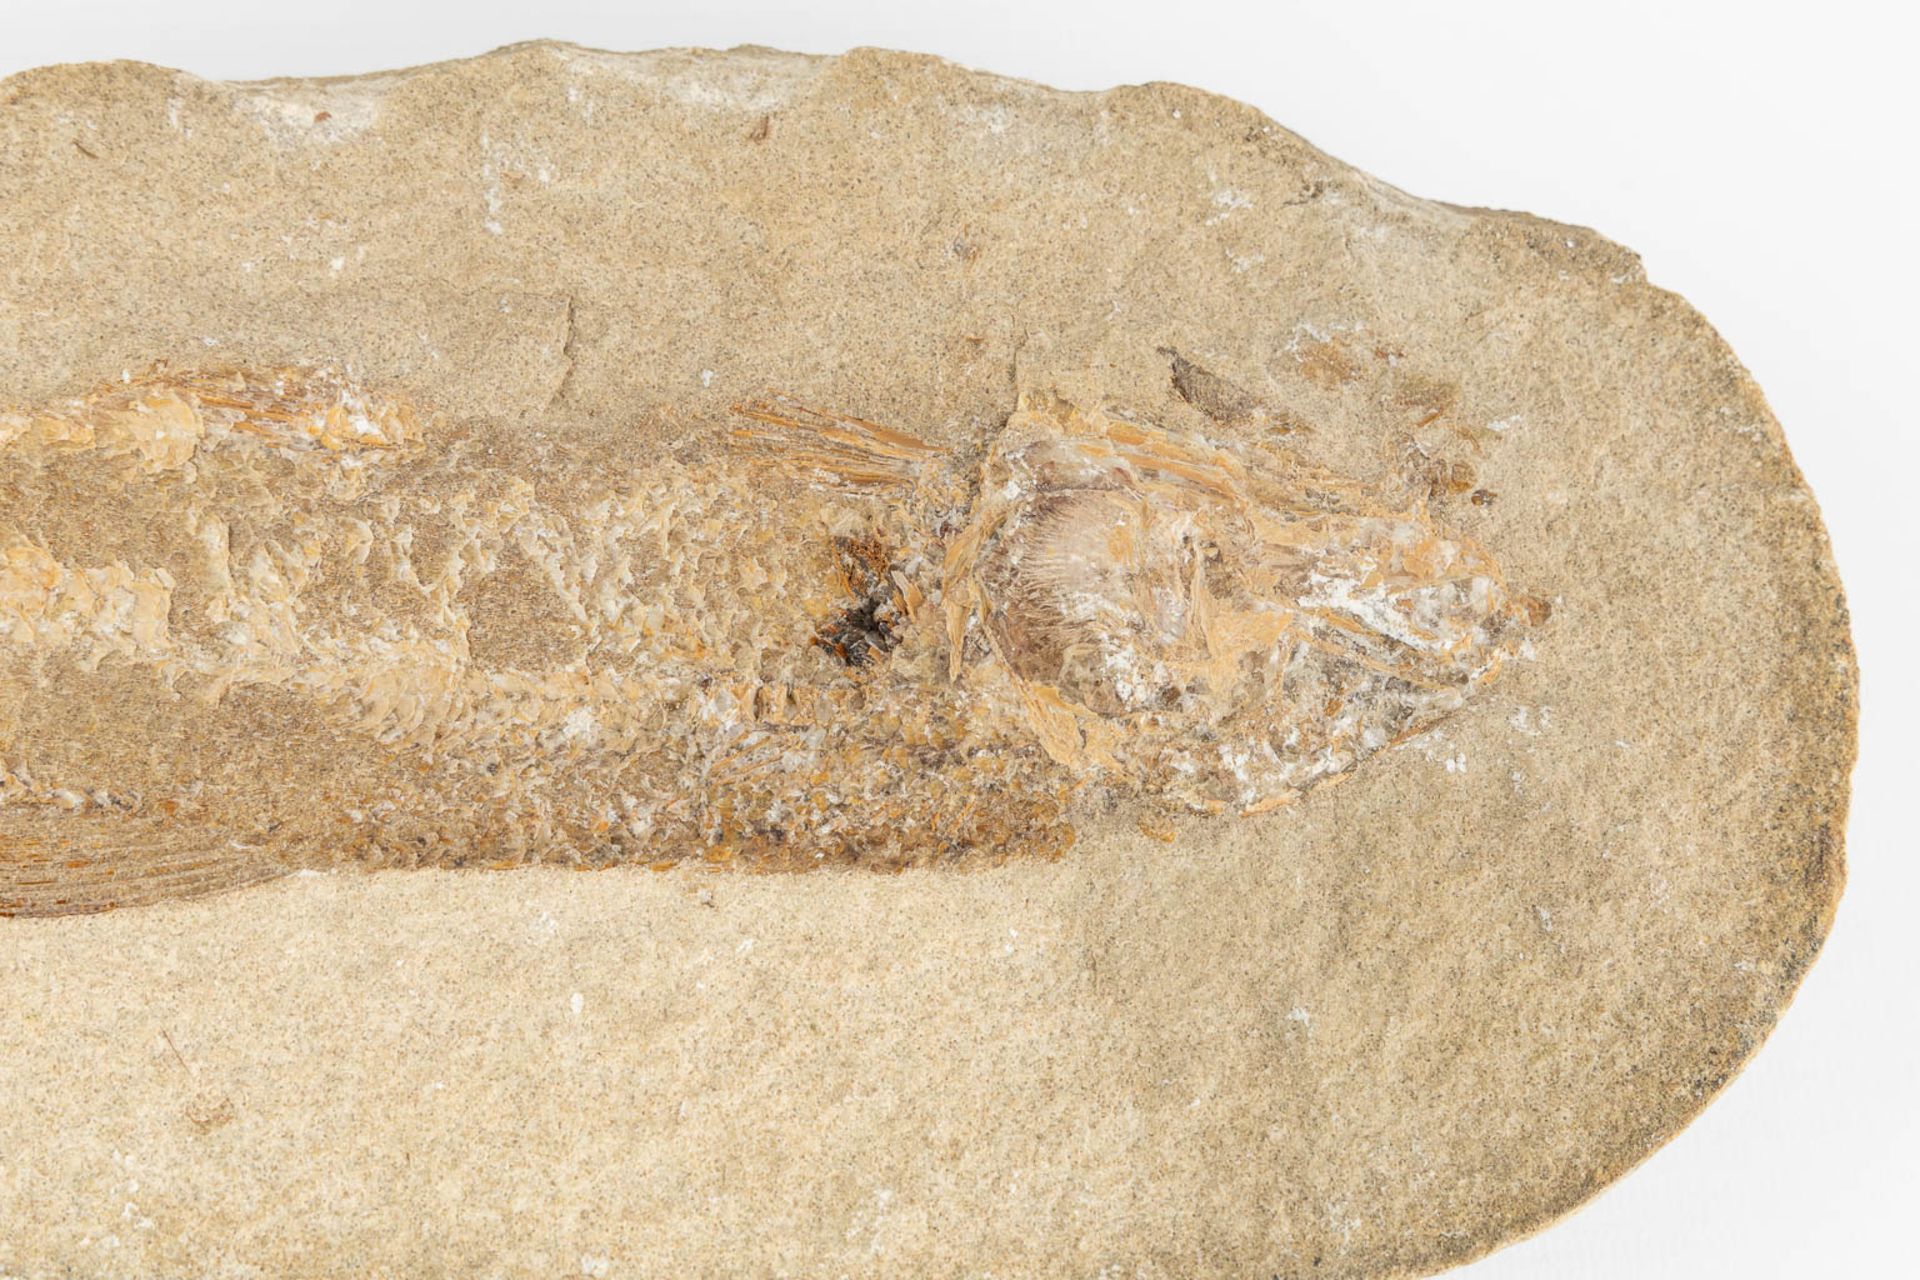 A fossil of a fish in a stone, with both pieces. (L:8 x W:32 x H:15 cm) - Bild 9 aus 11